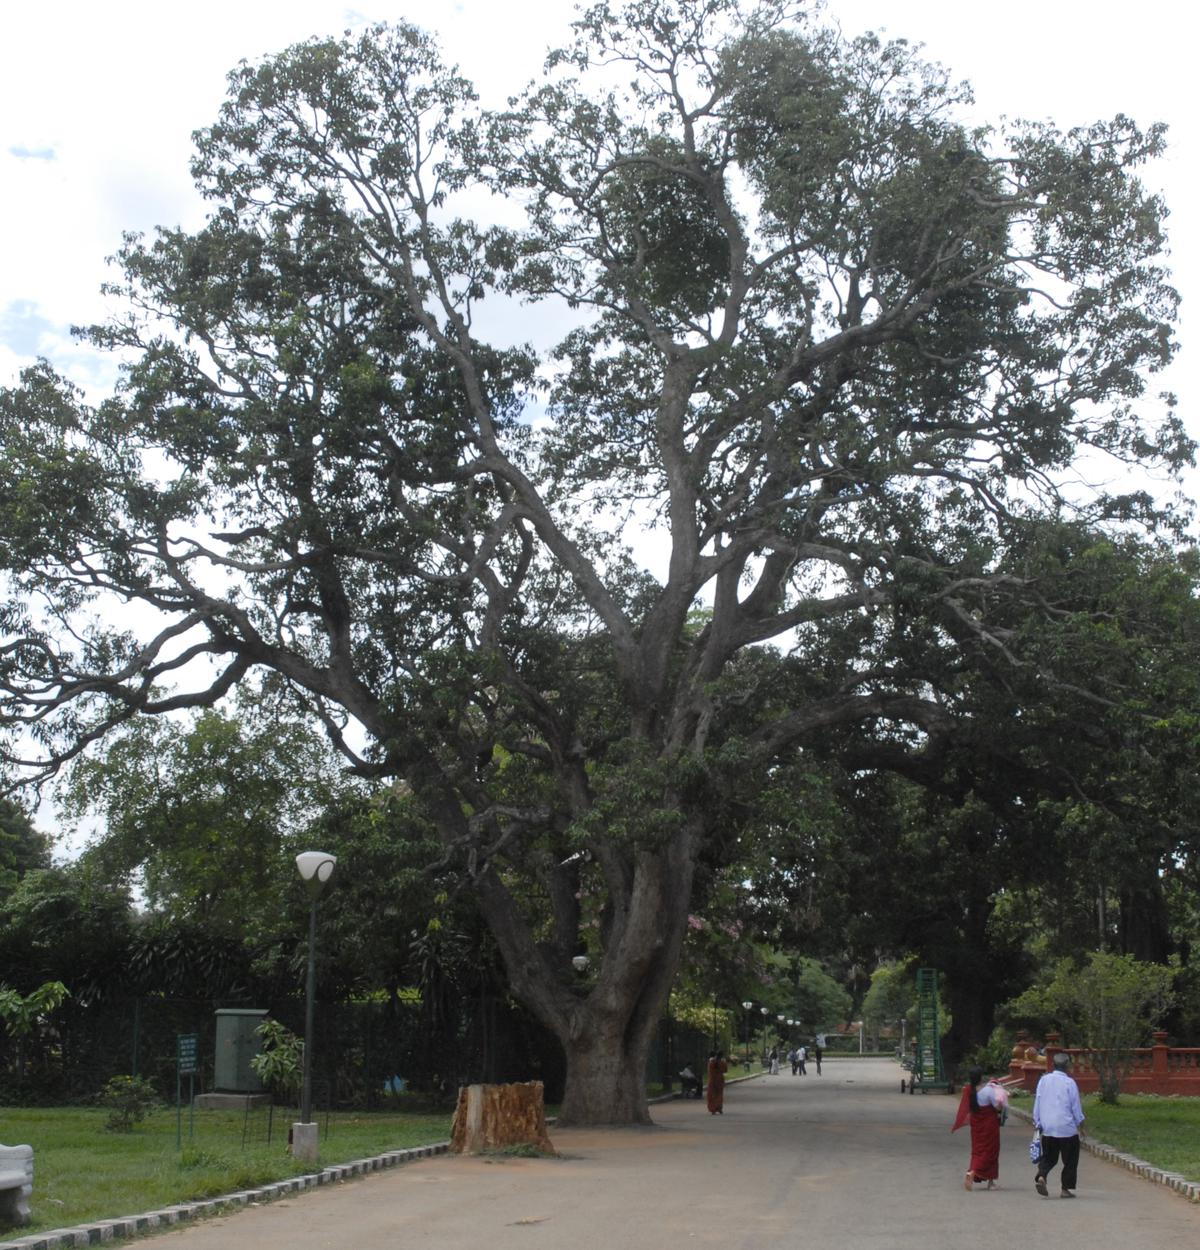 The mango tree at Lal Baugh, Bangalore, is said to have been planted during Tipu Sultan.